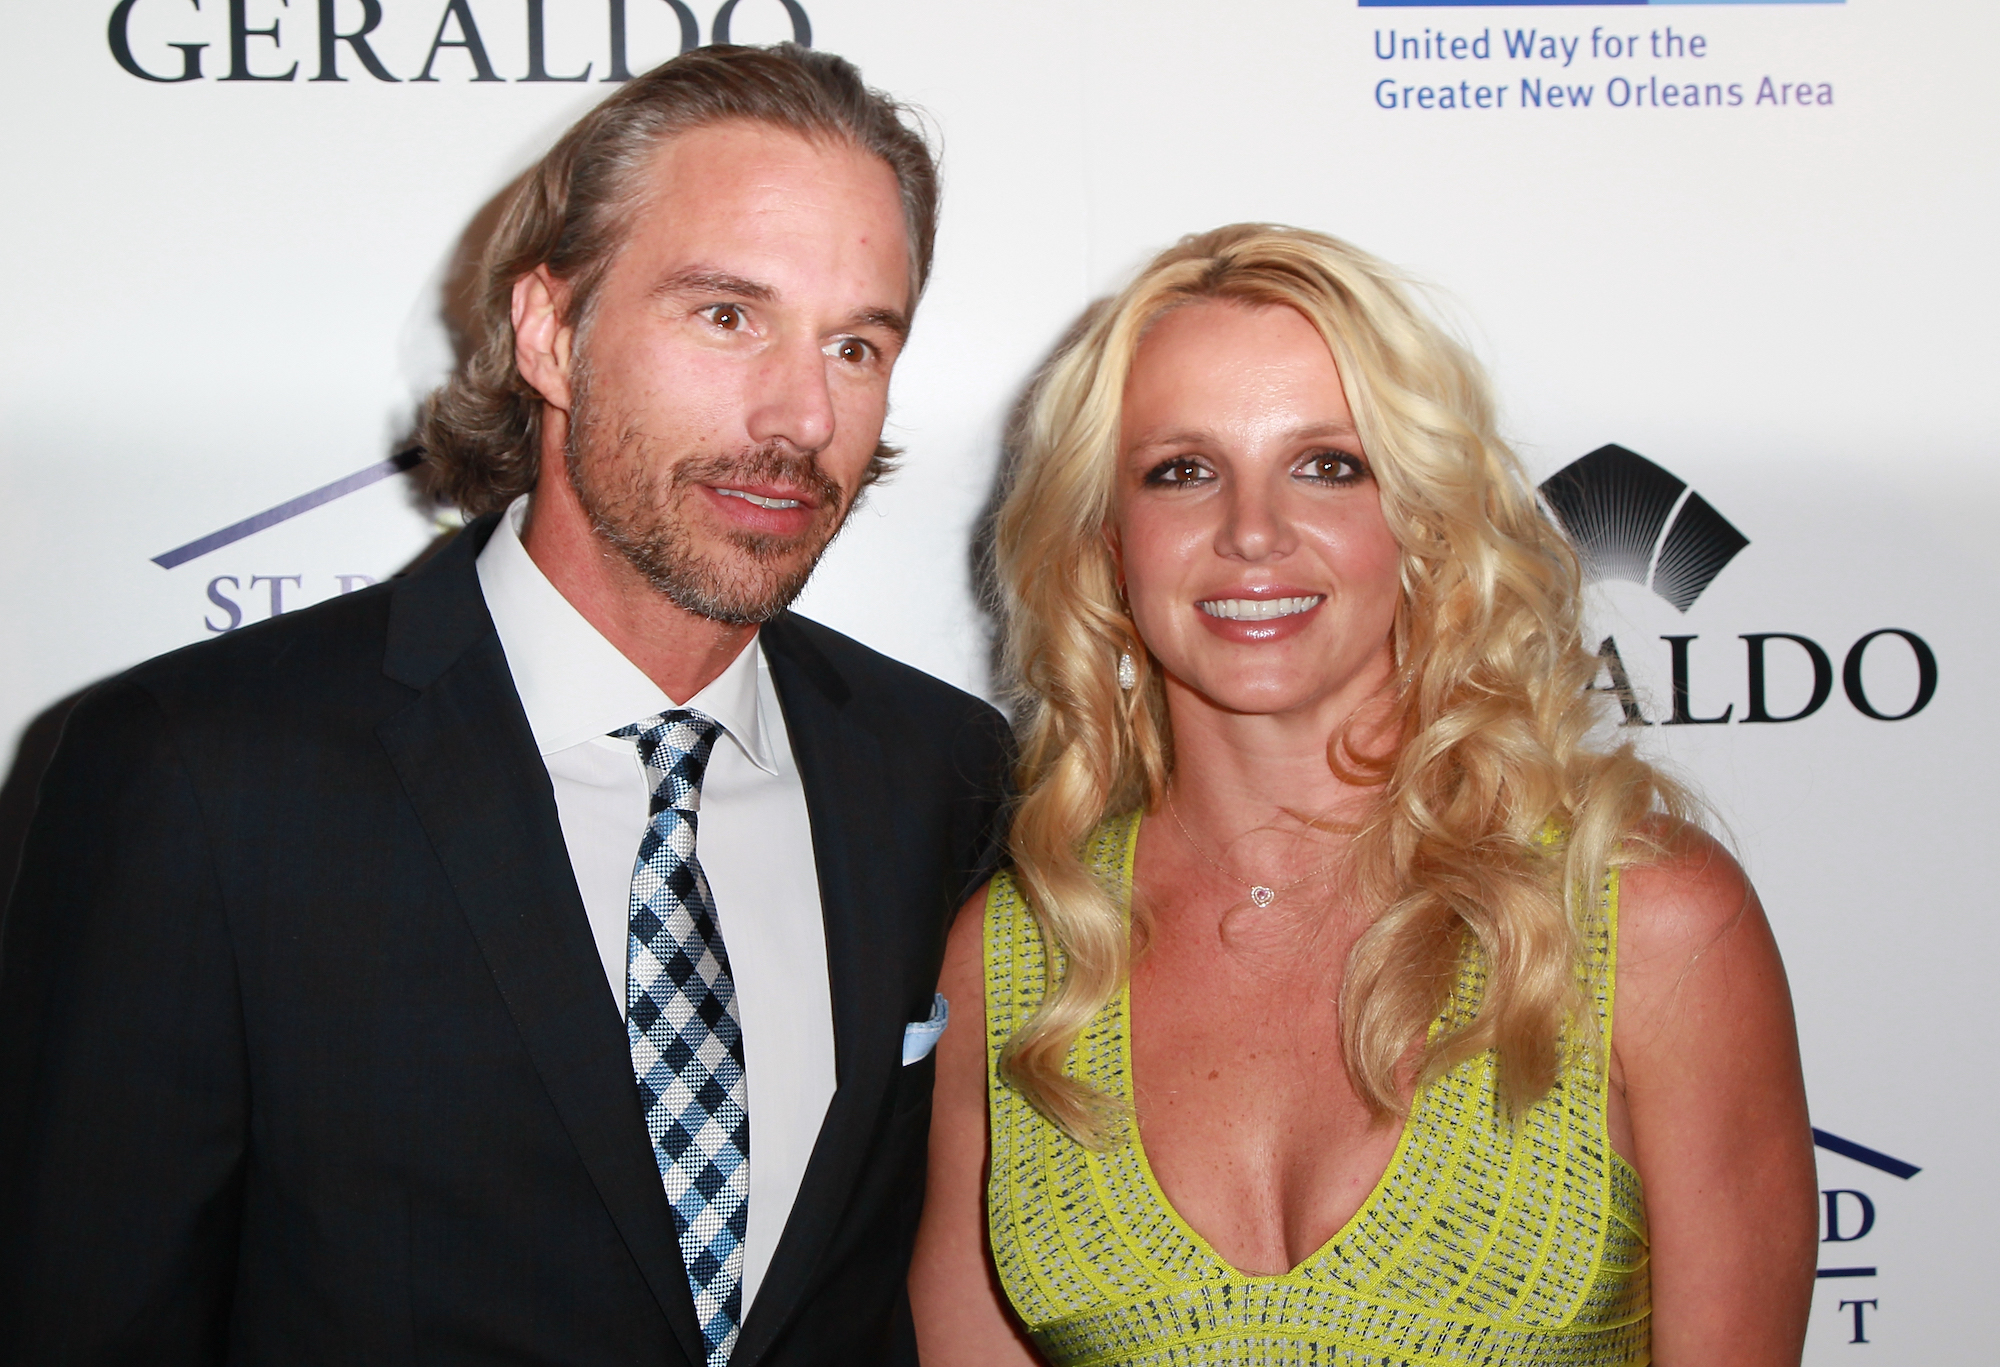 Britney Spears posing with her ex-fiancé Jason Trawick at an event in 2011